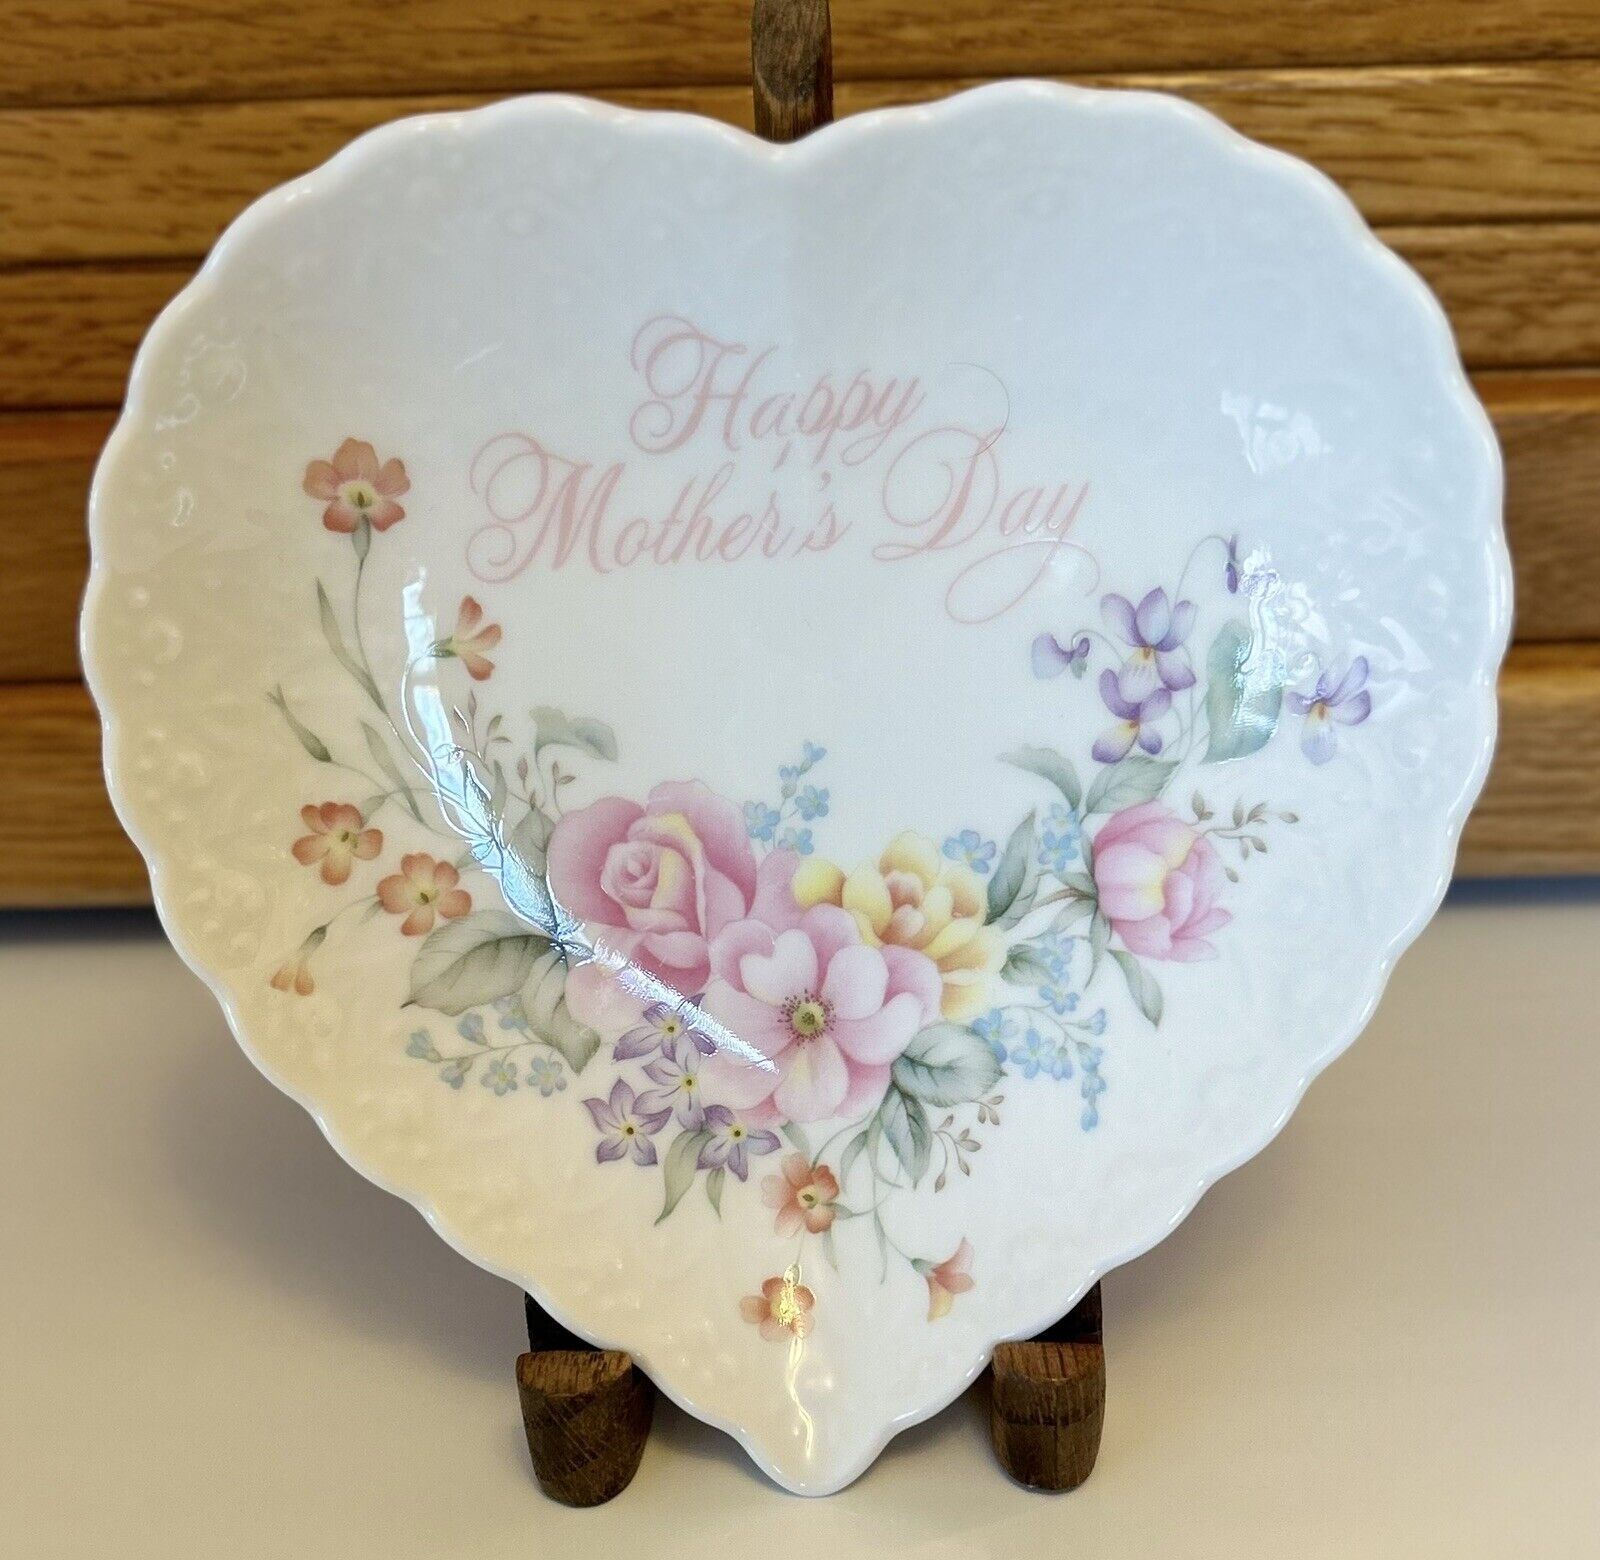 Mikasa White Bone China Happy Mother's Day Heart-Shaped Dish with Flowers, Japan